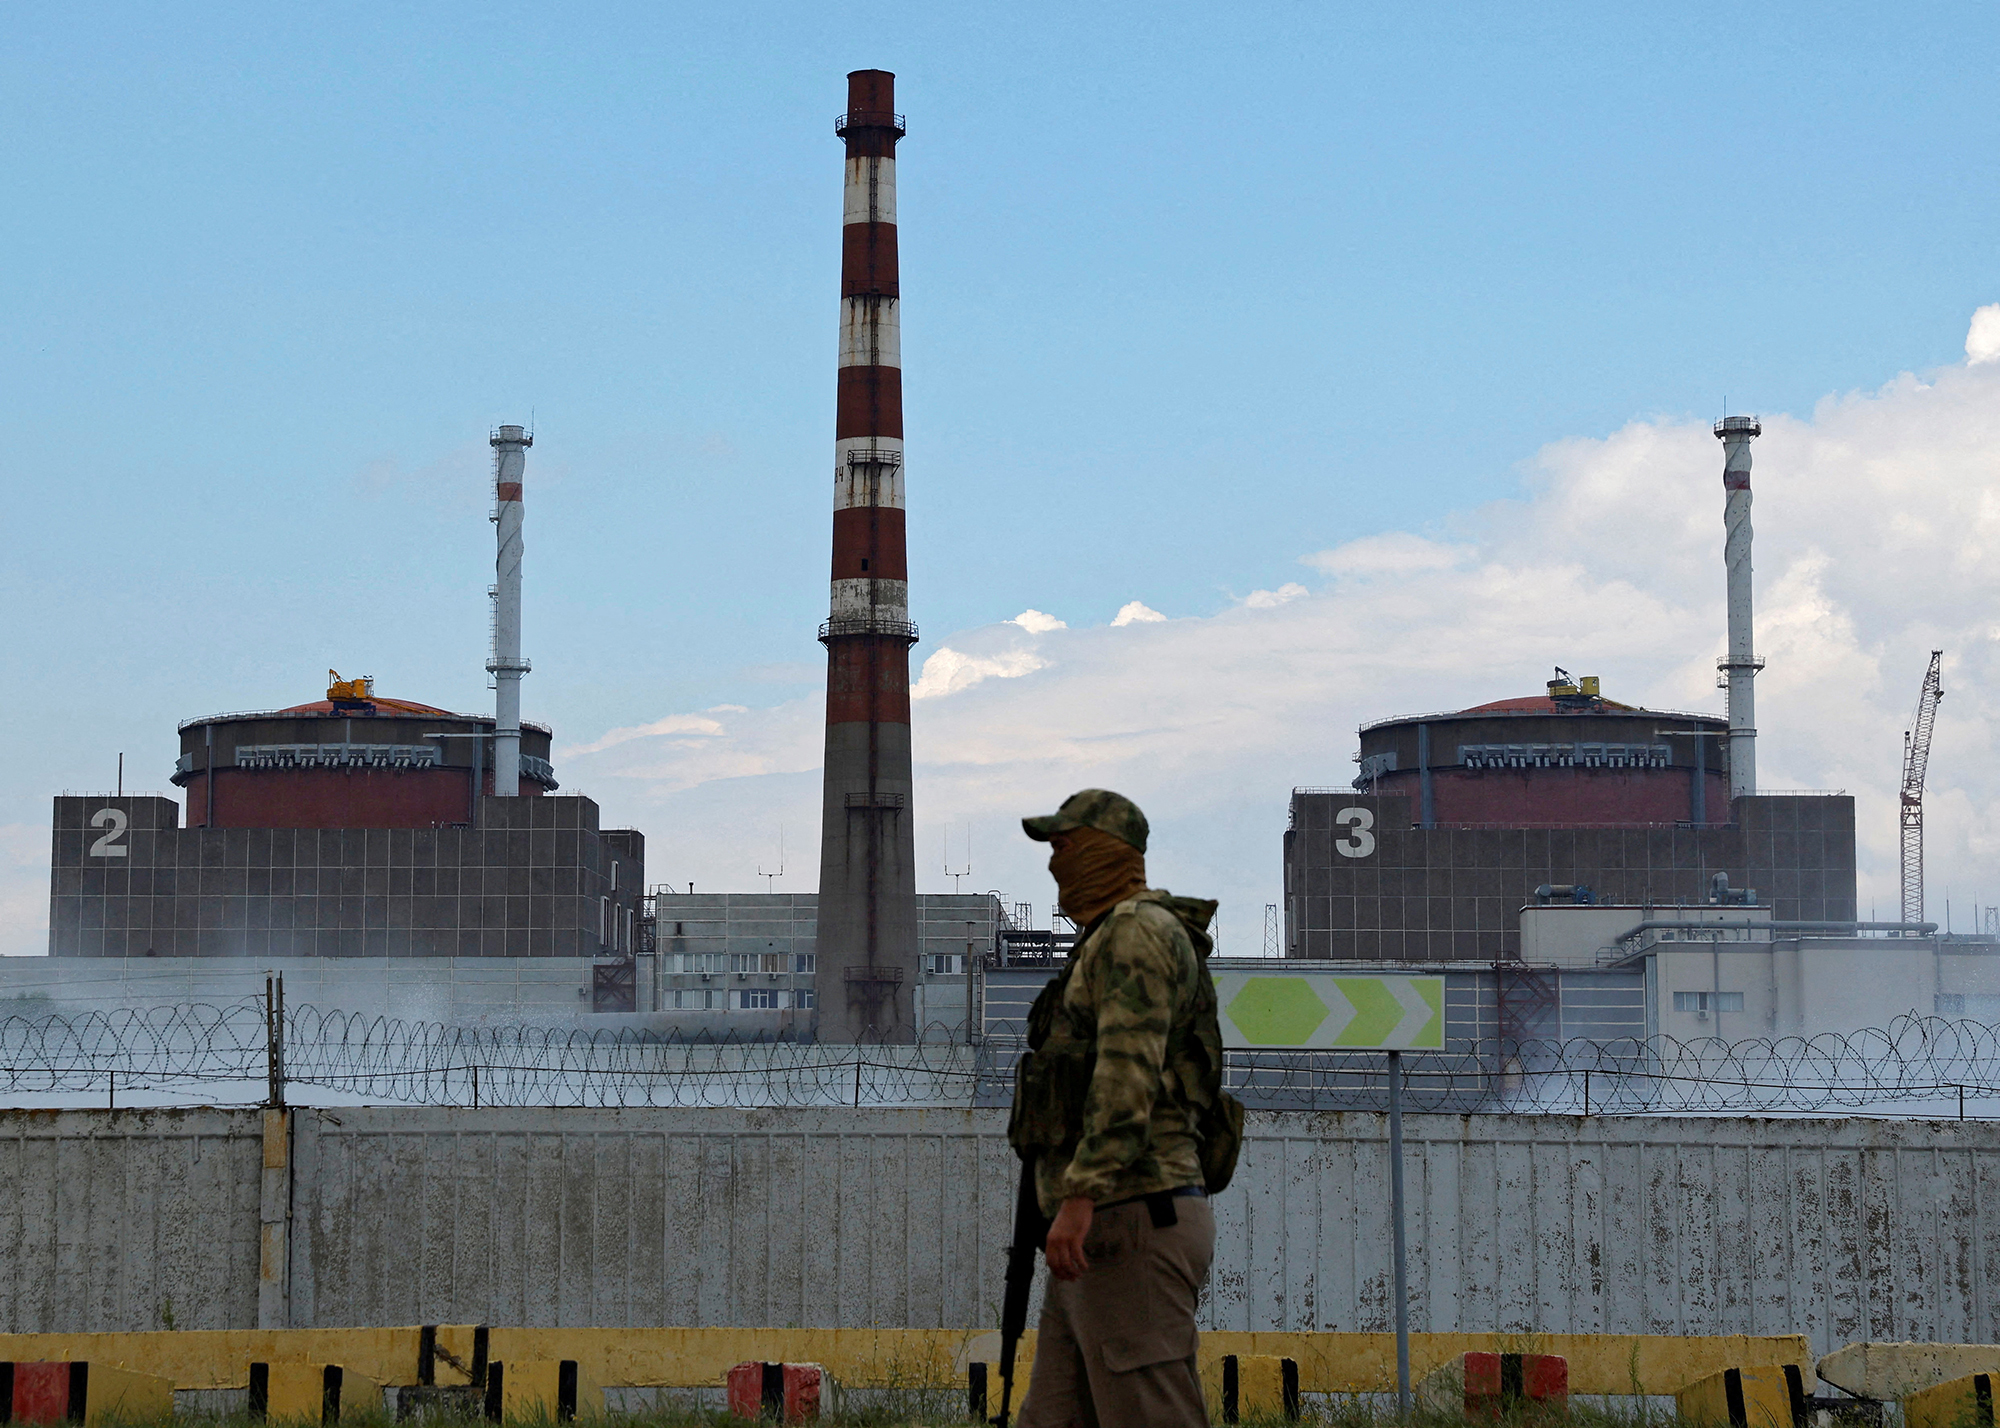 A serviceman with a Russian flag on his uniform stands guard near the Zaporizhzhia nuclear plant on August 4.